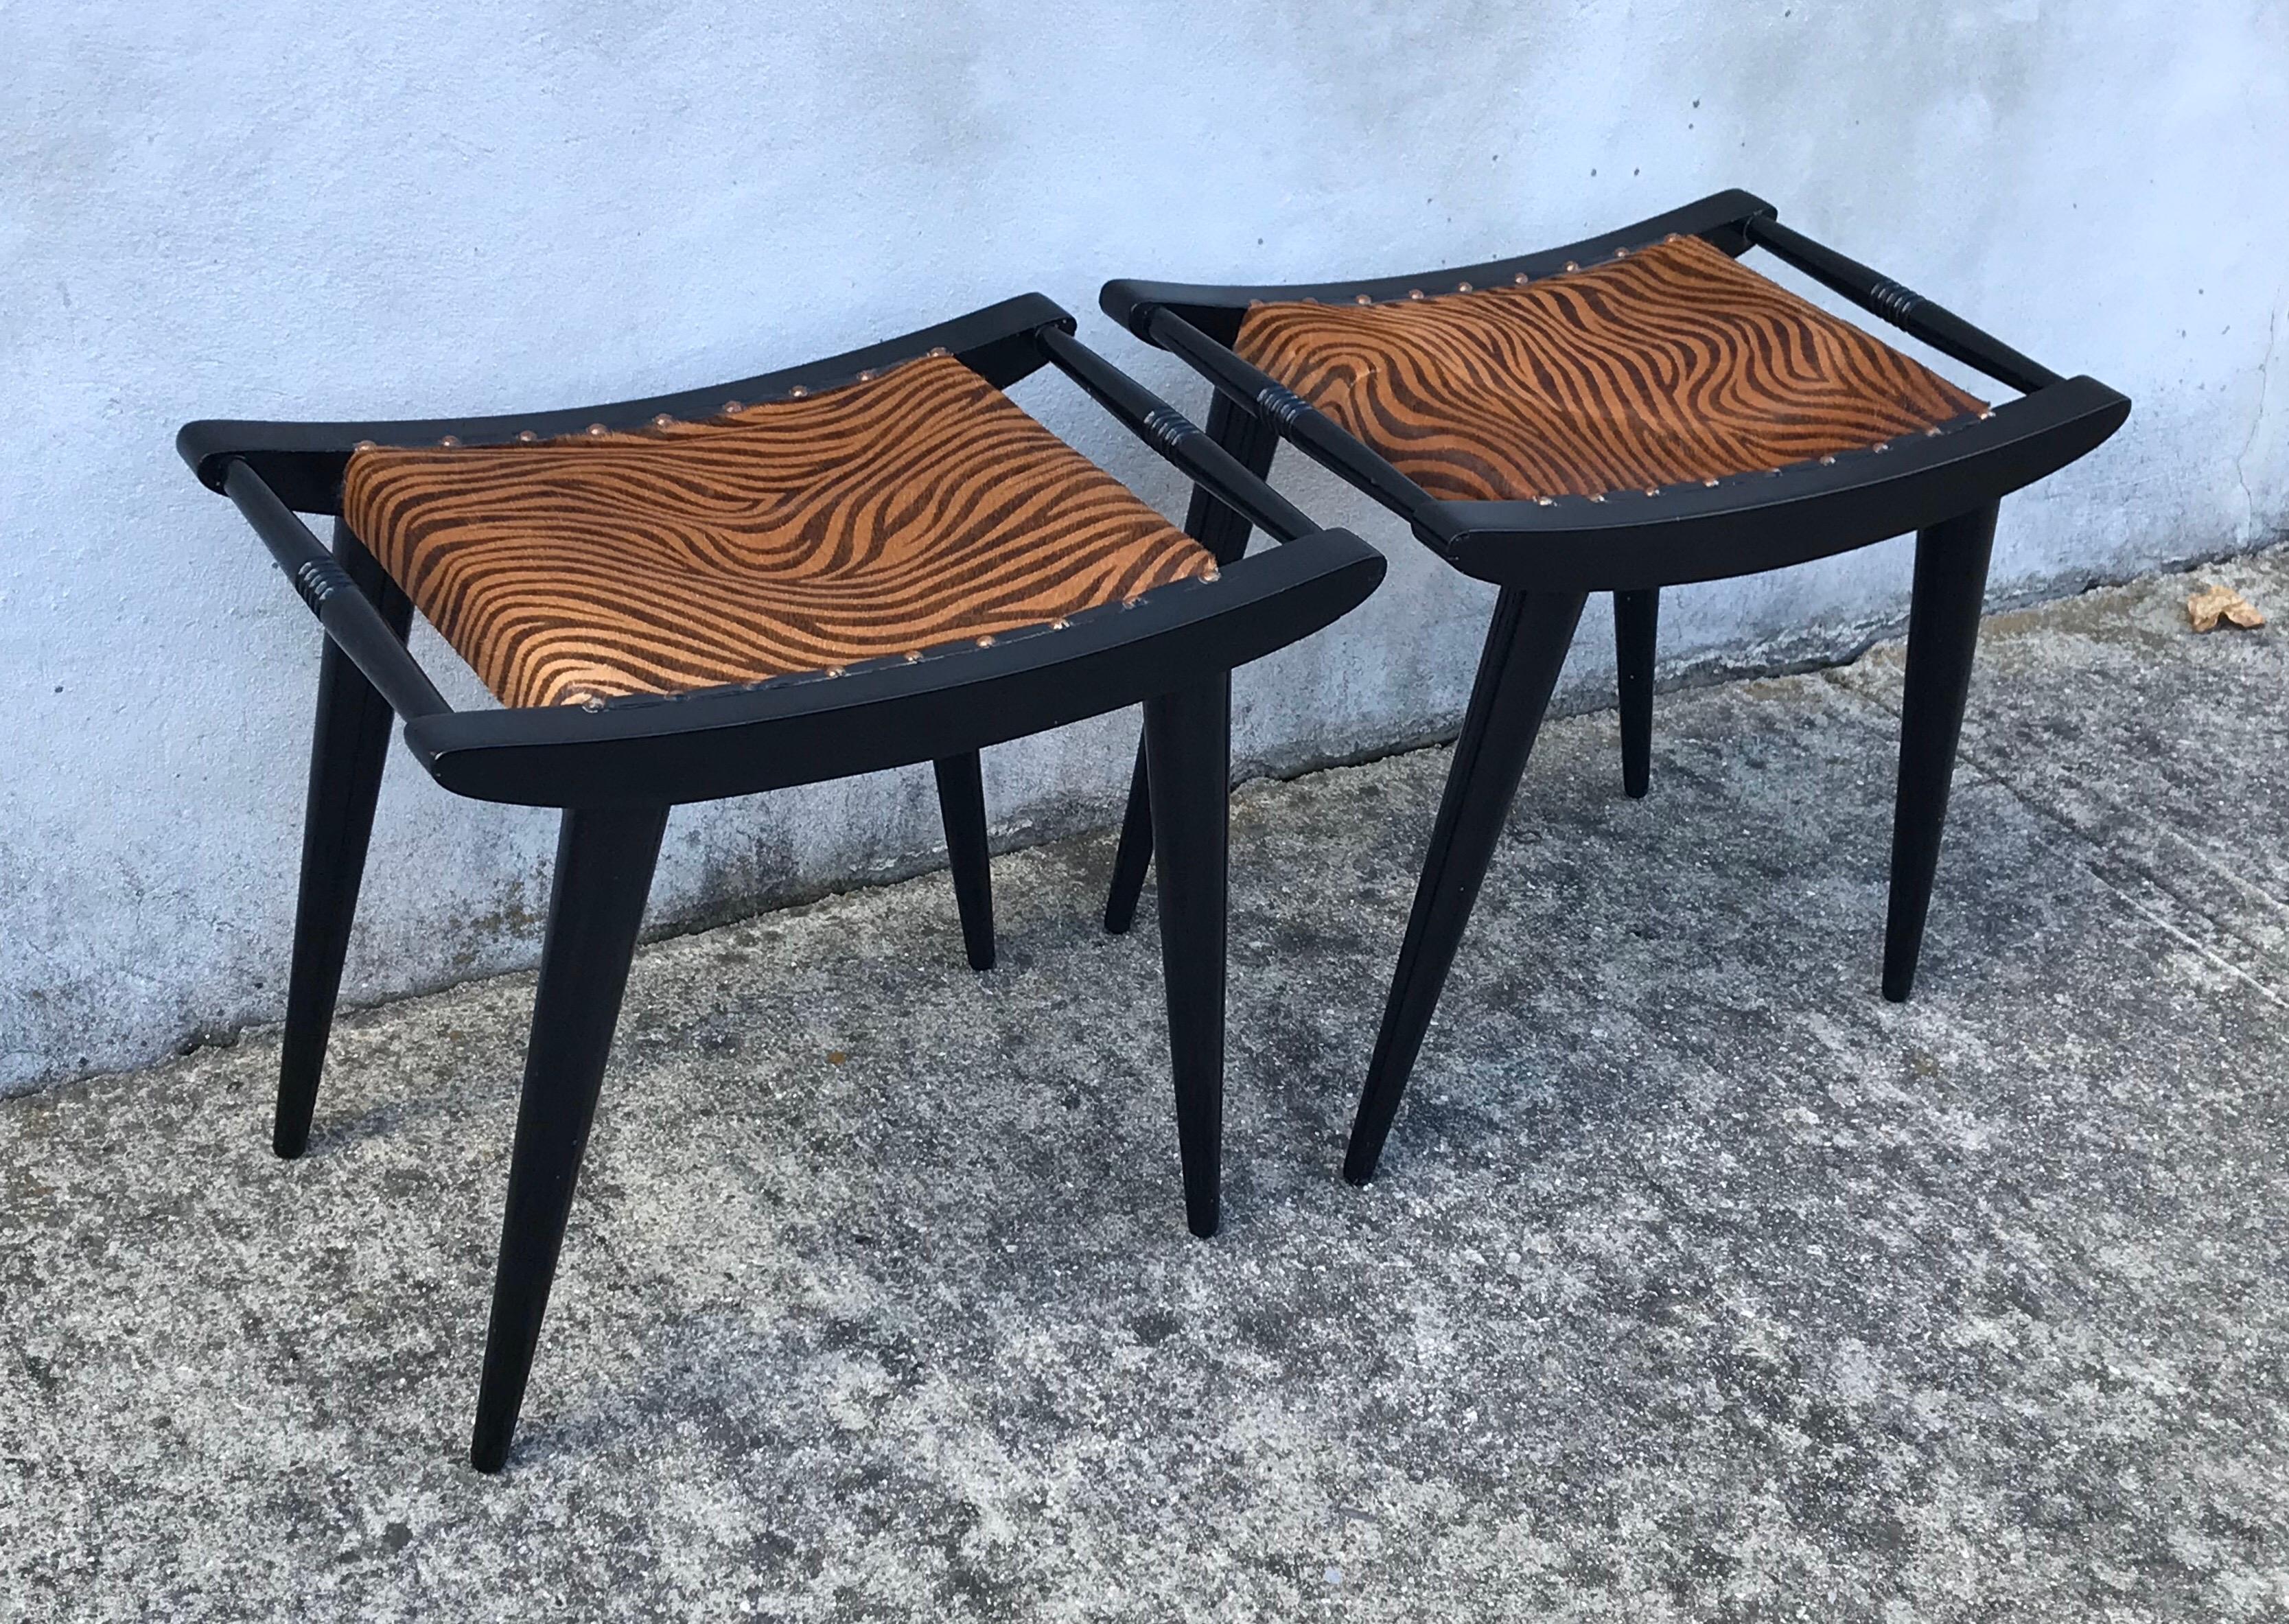 Beautiful pair of black lacquer side stools with zebra pattern printed seats, show very well, super high quality.